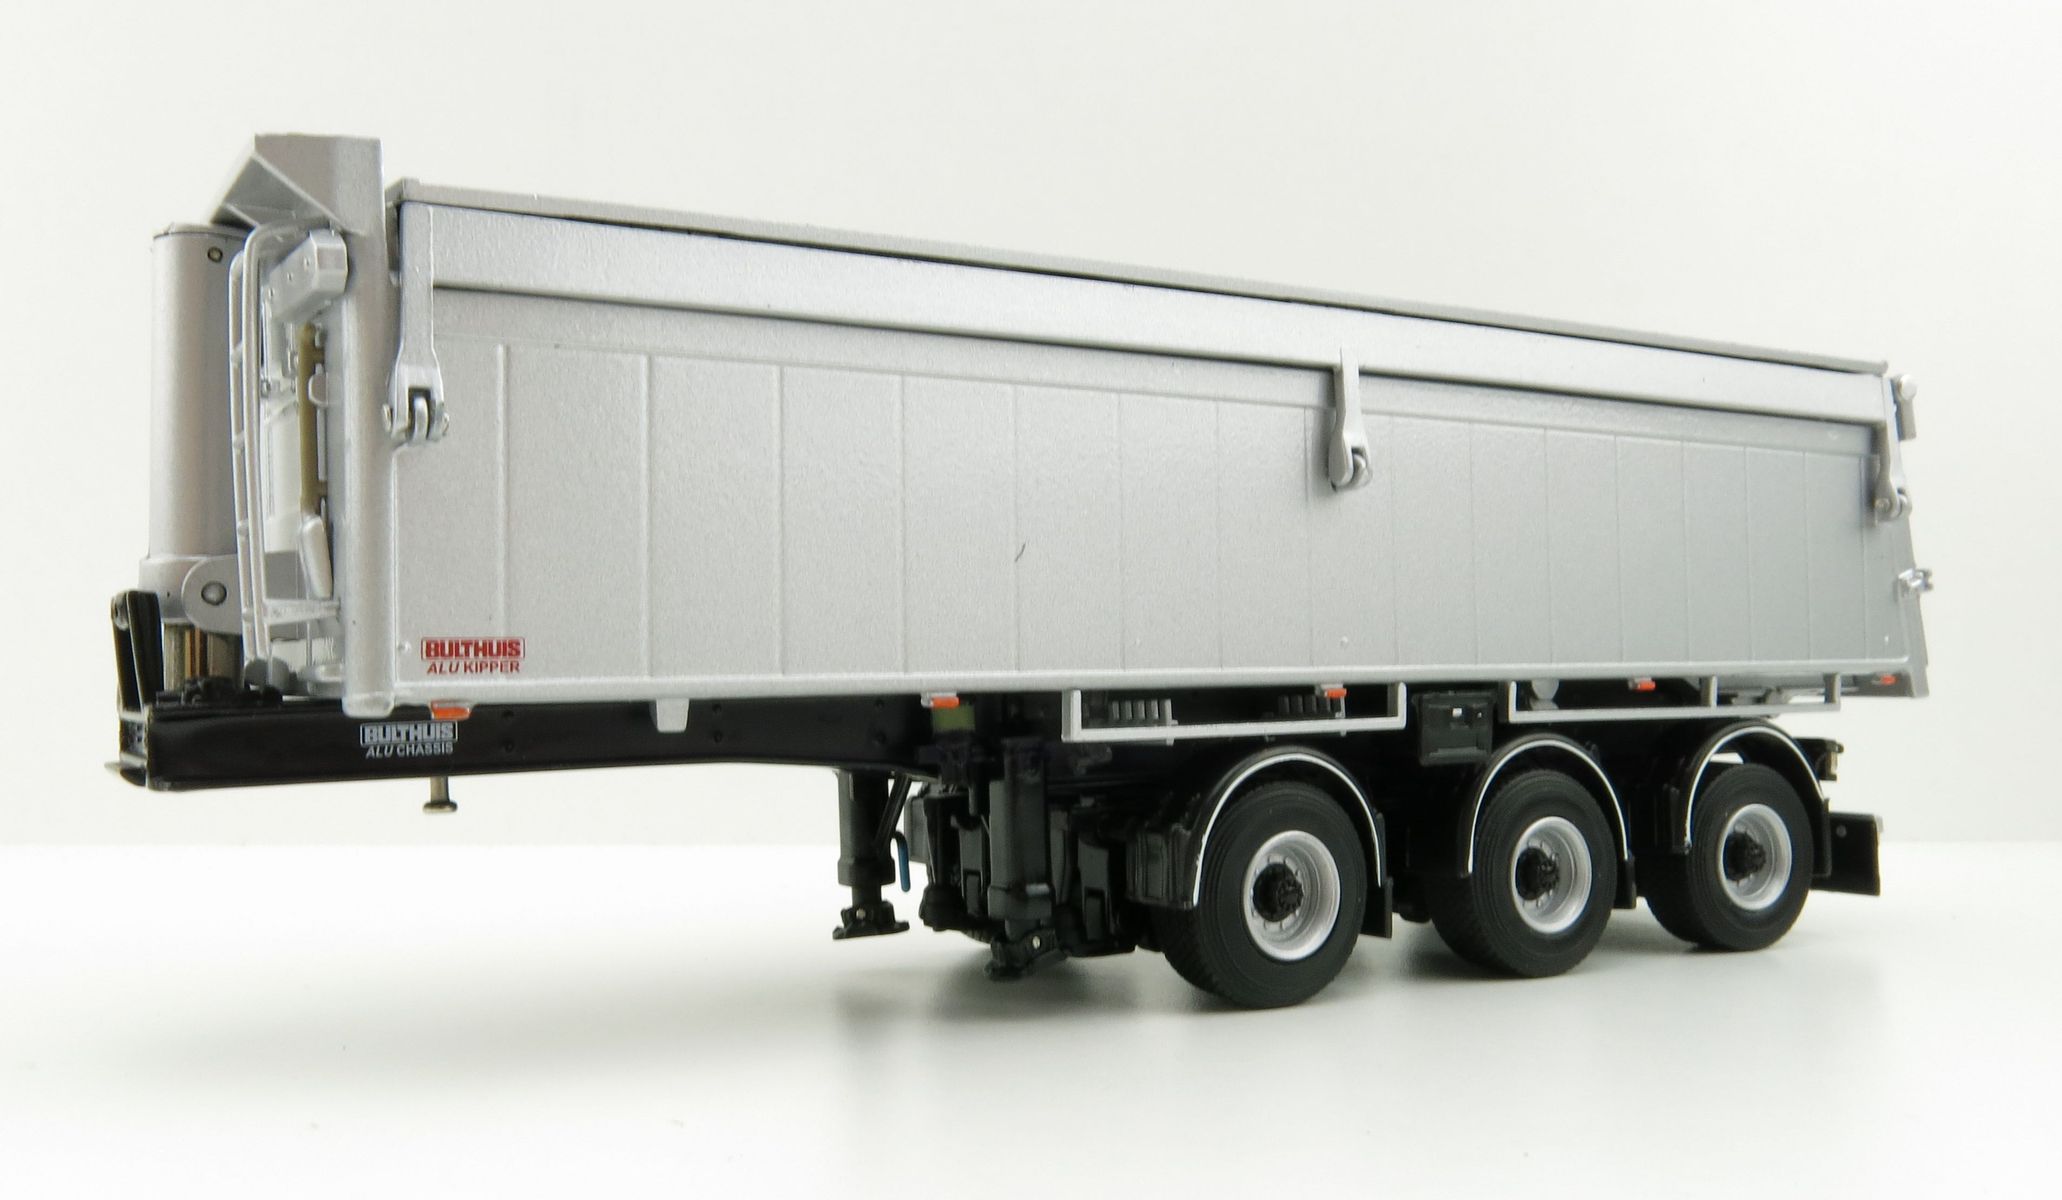 Product Image - WSI 03-1003 - Bulthuis Asphalt and Sand 3-Axle Alu Kipper Steerable Trailer - Scale 1:50